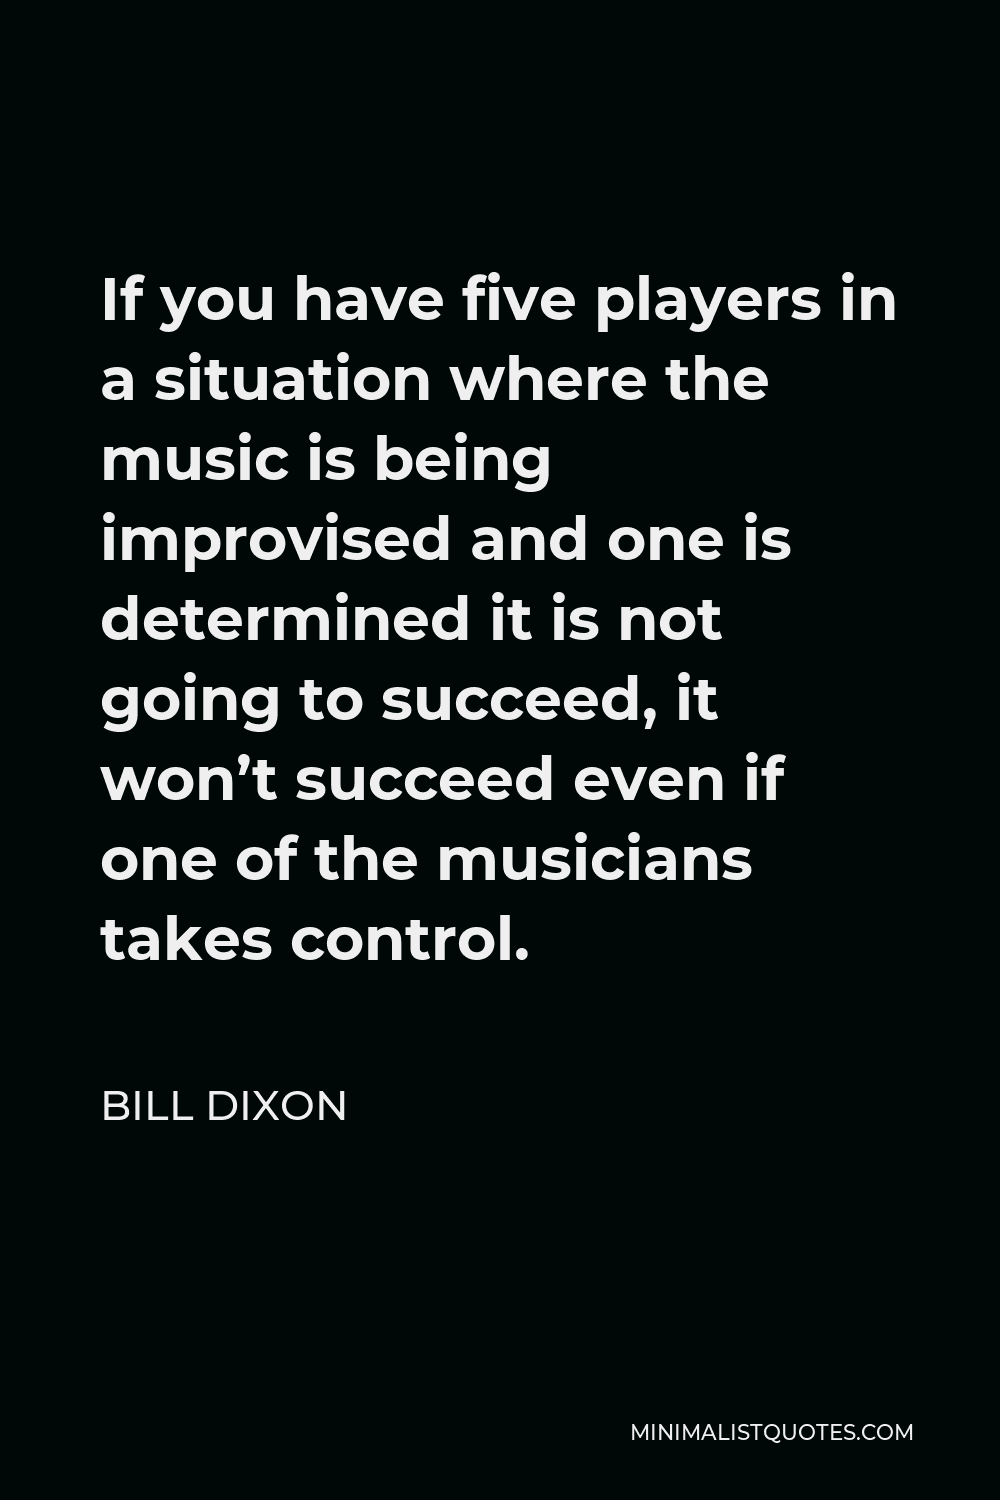 Bill Dixon Quote - If you have five players in a situation where the music is being improvised and one is determined it is not going to succeed, it won’t succeed even if one of the musicians takes control.